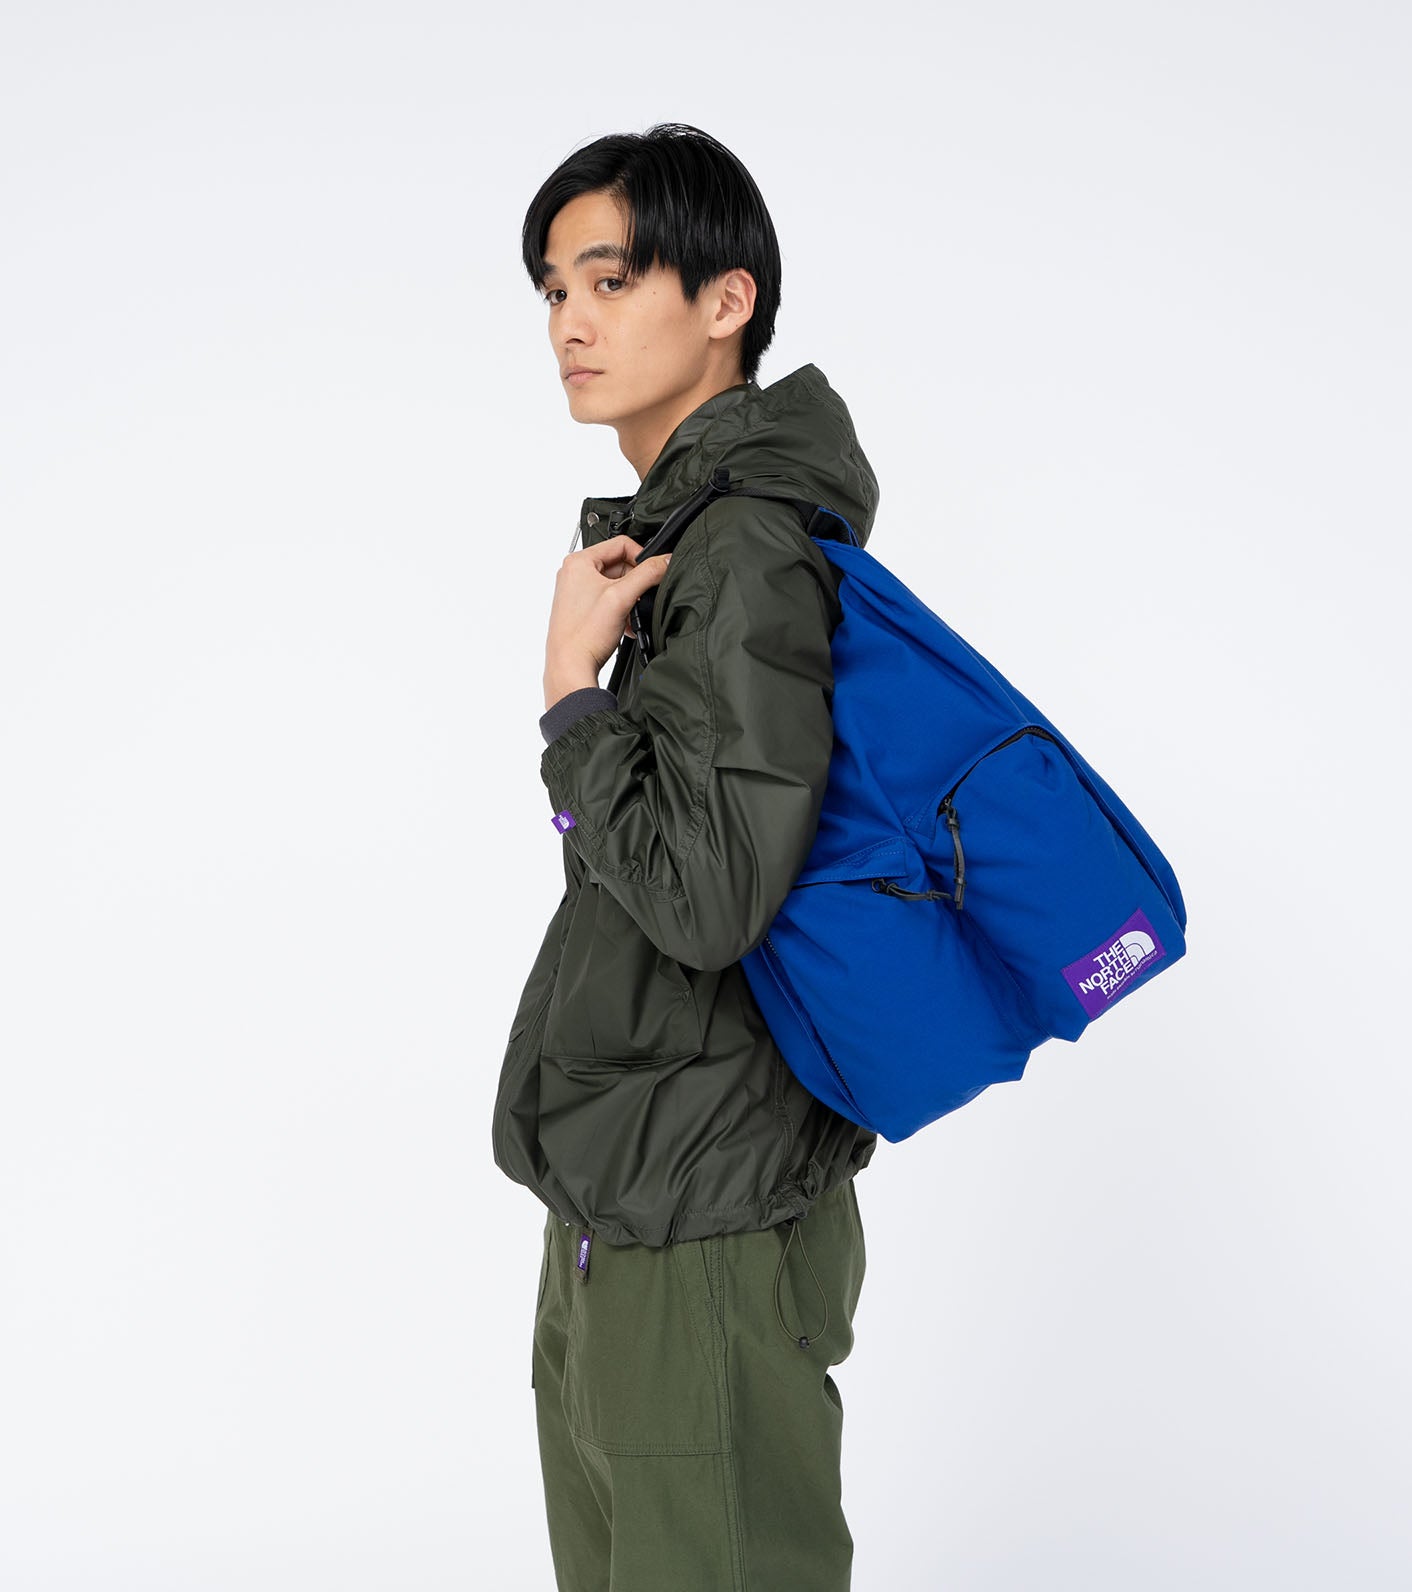 THE NORTH FACE PURPLE LABEL Field 2Way Tote Bag